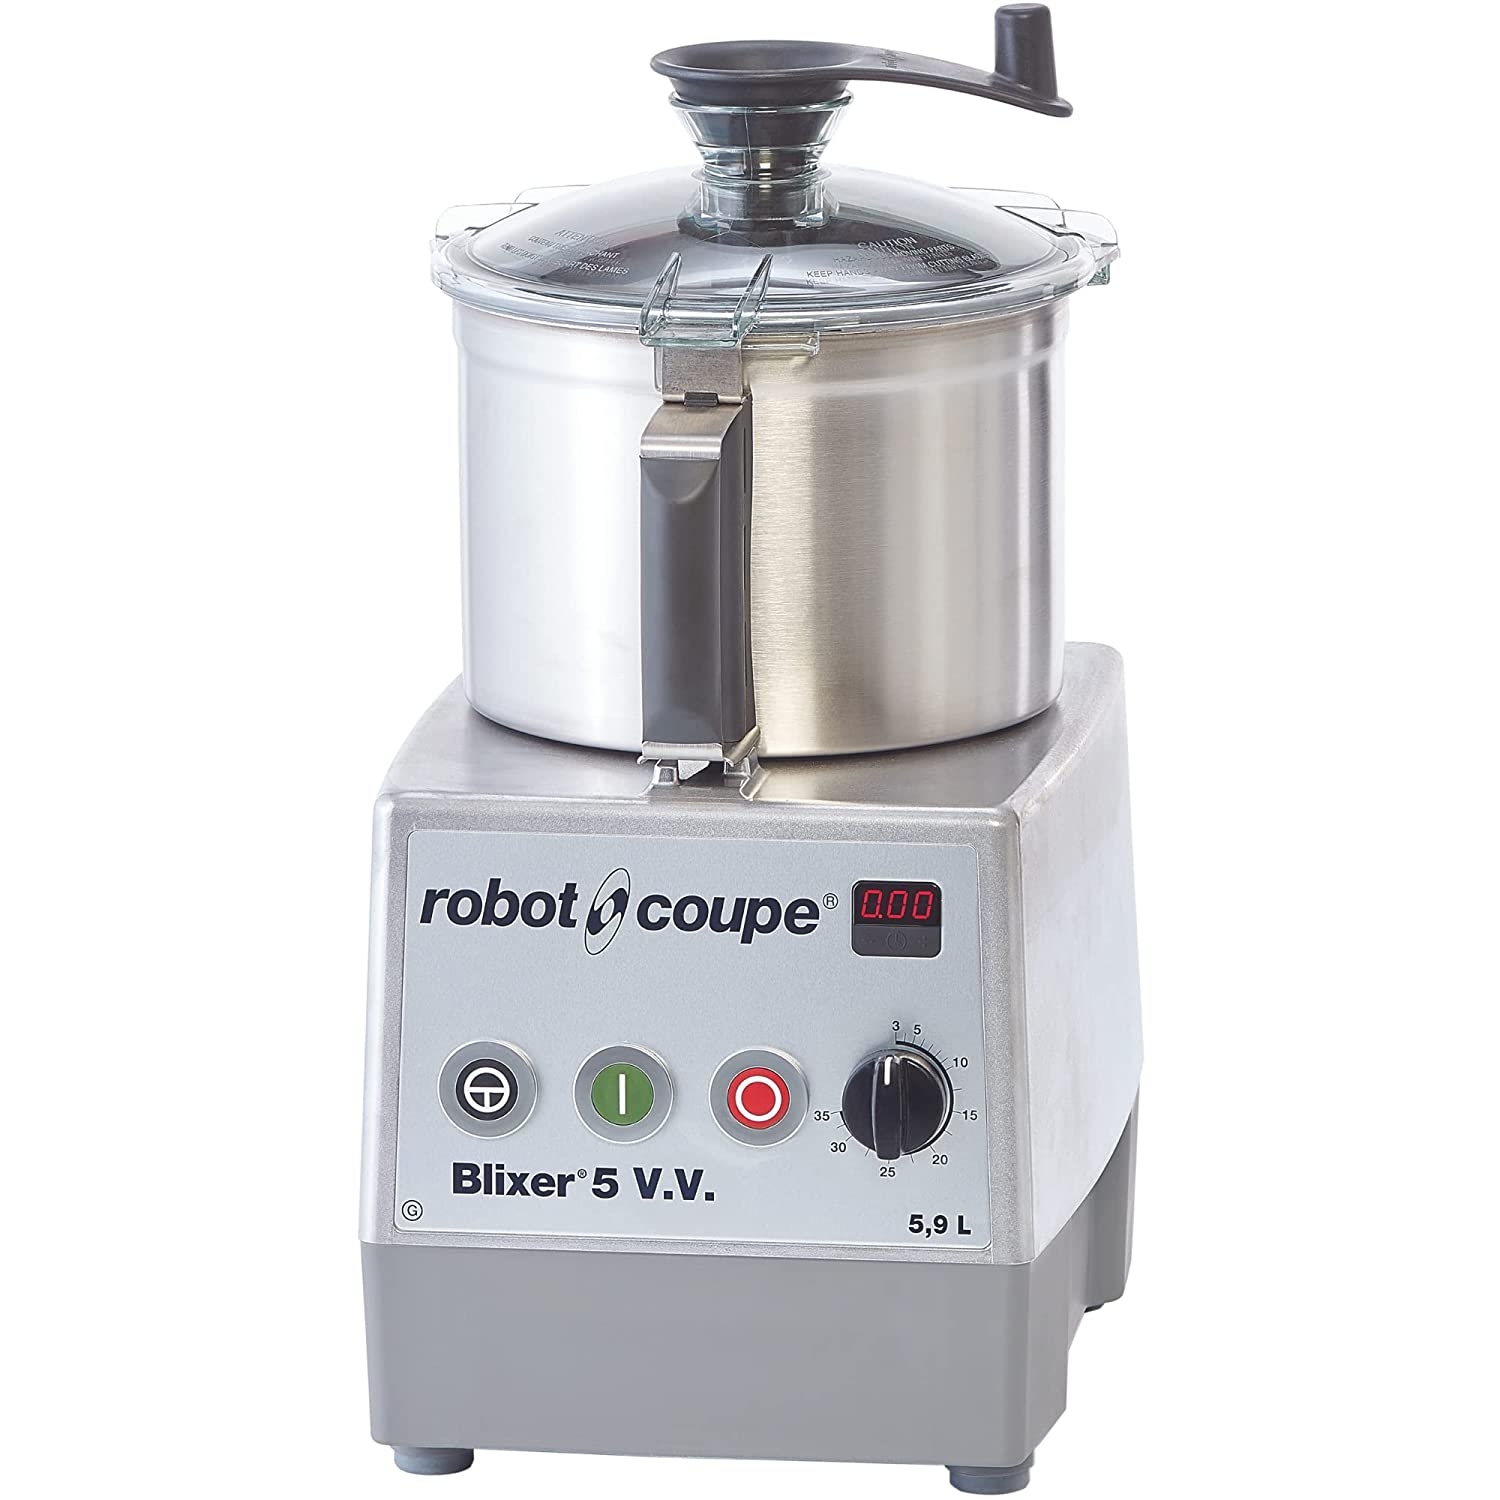 Robot Coupe BLIXER5VV 5.5-Liter Commercial Variable Speed Blender/Mixer Food Processor, Stainless Steel, 120v Import To Shop